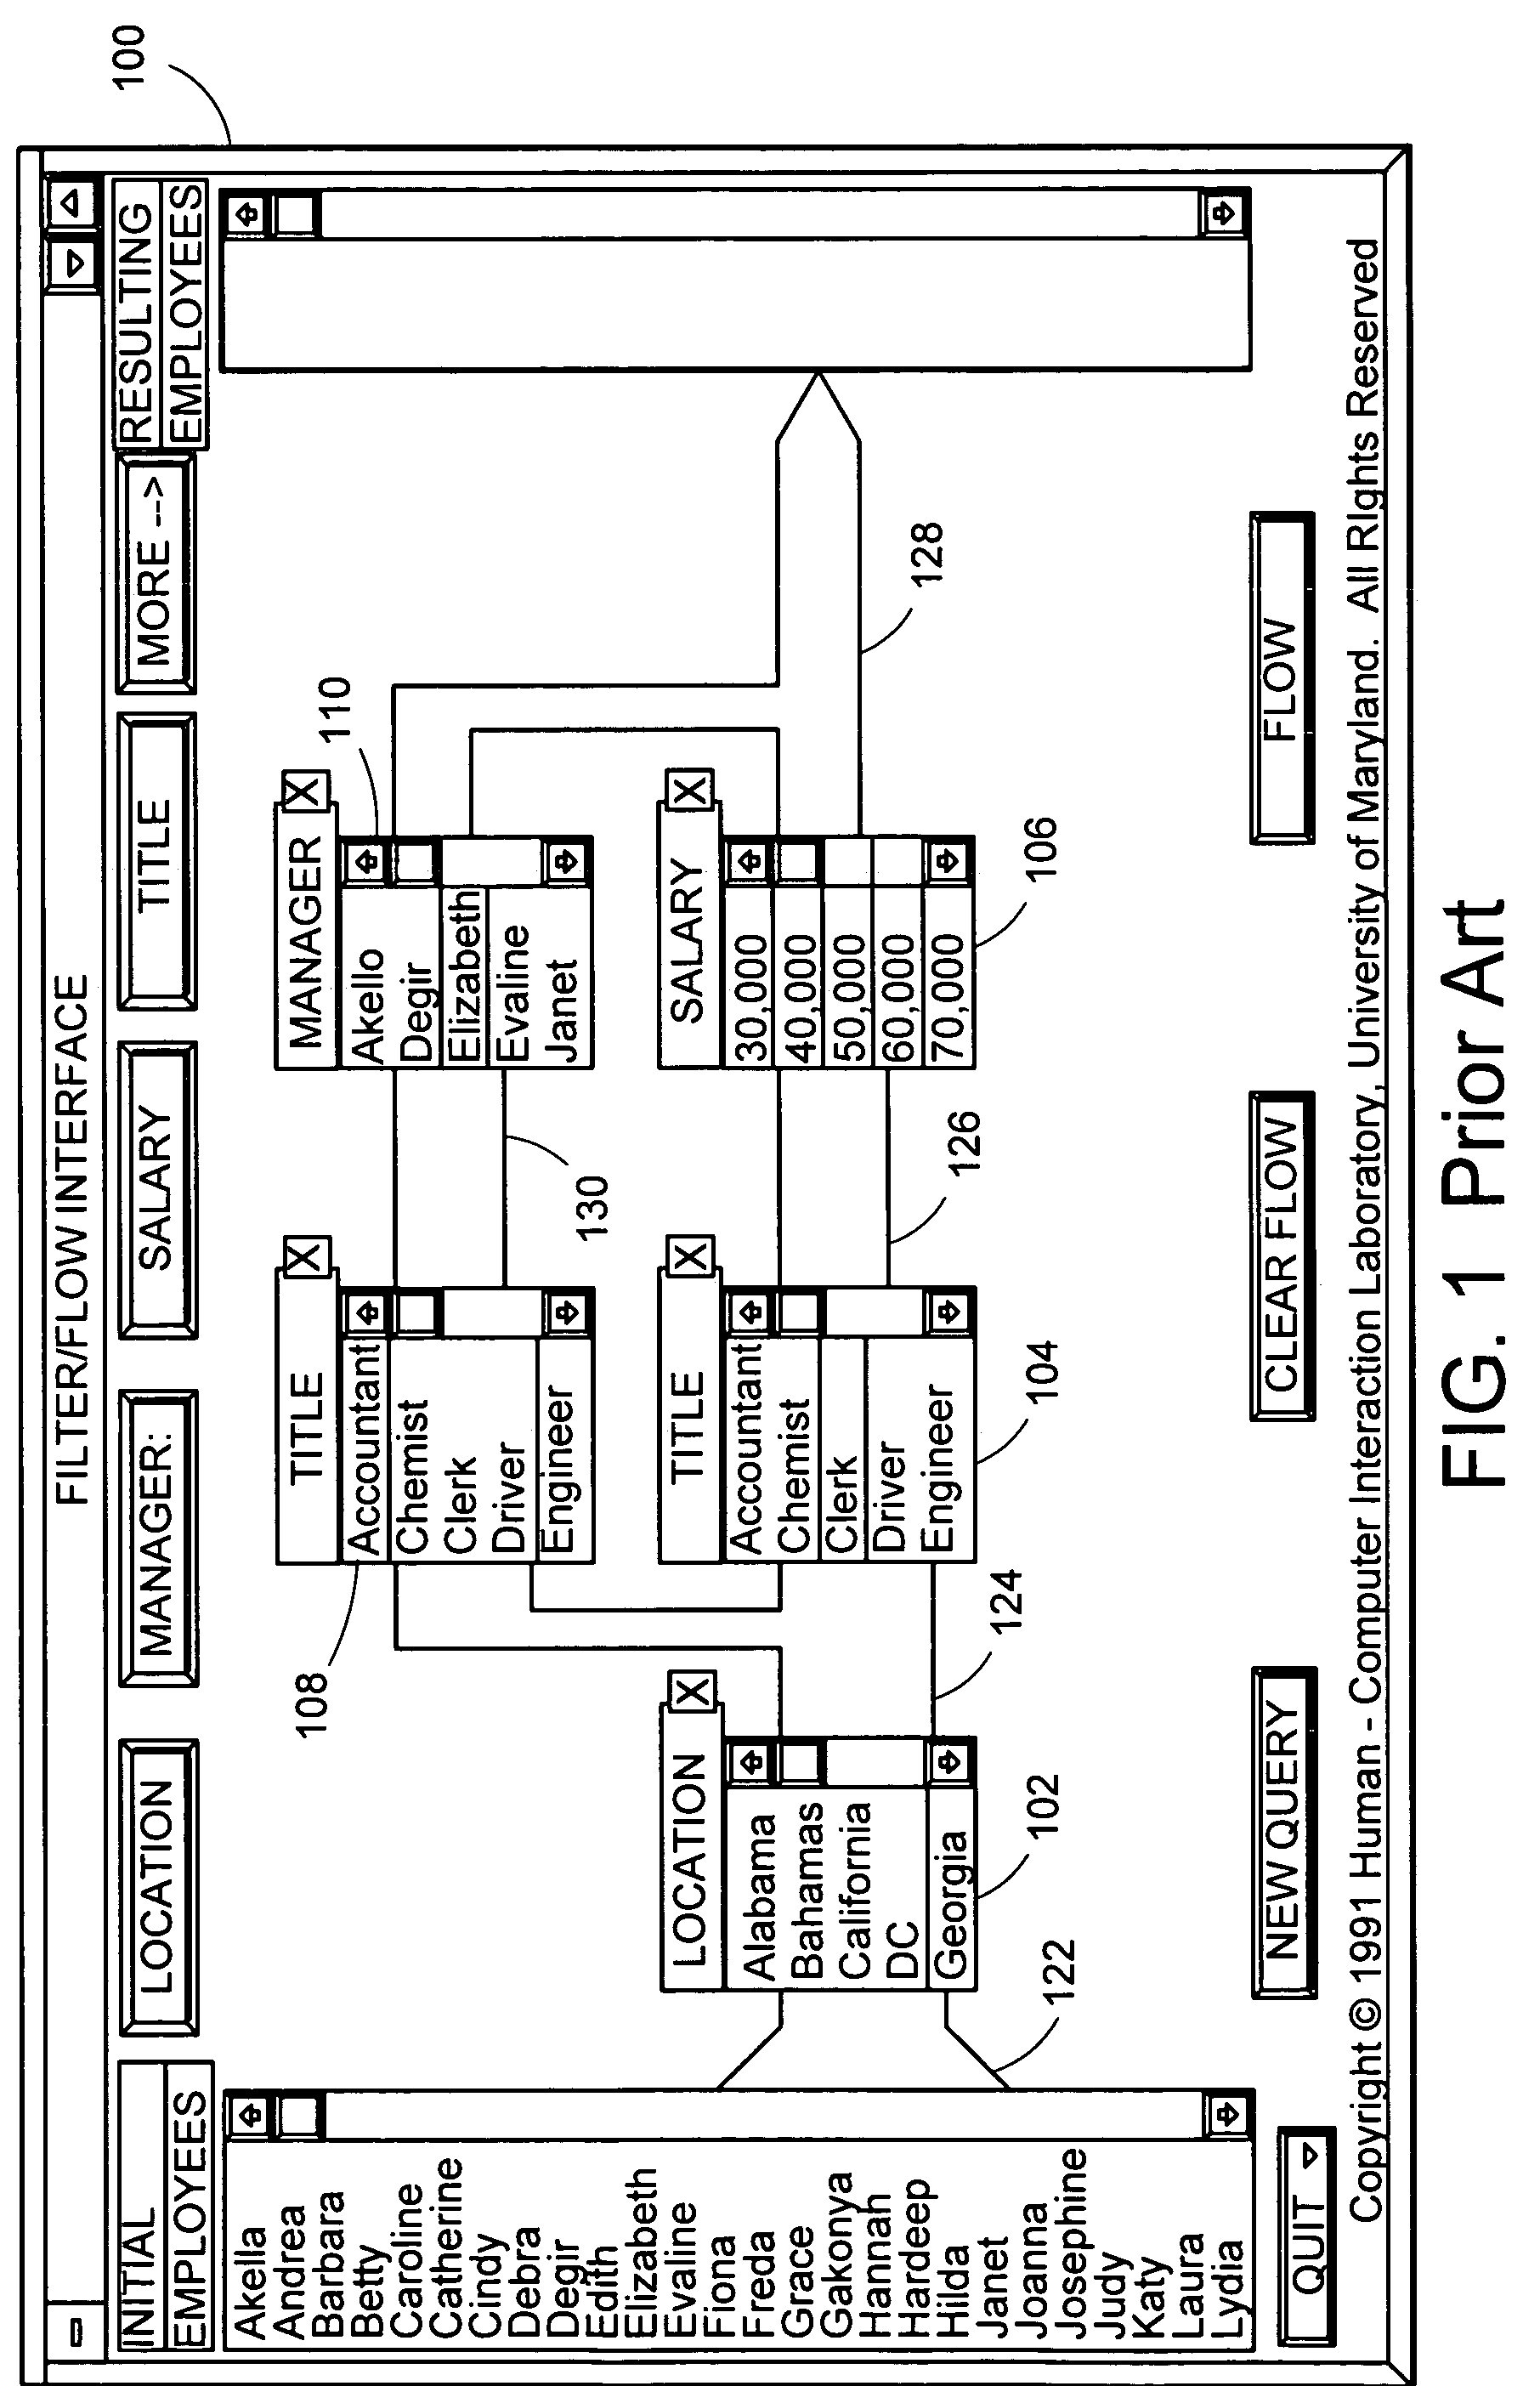 Graphical condition builder for facilitating database queries